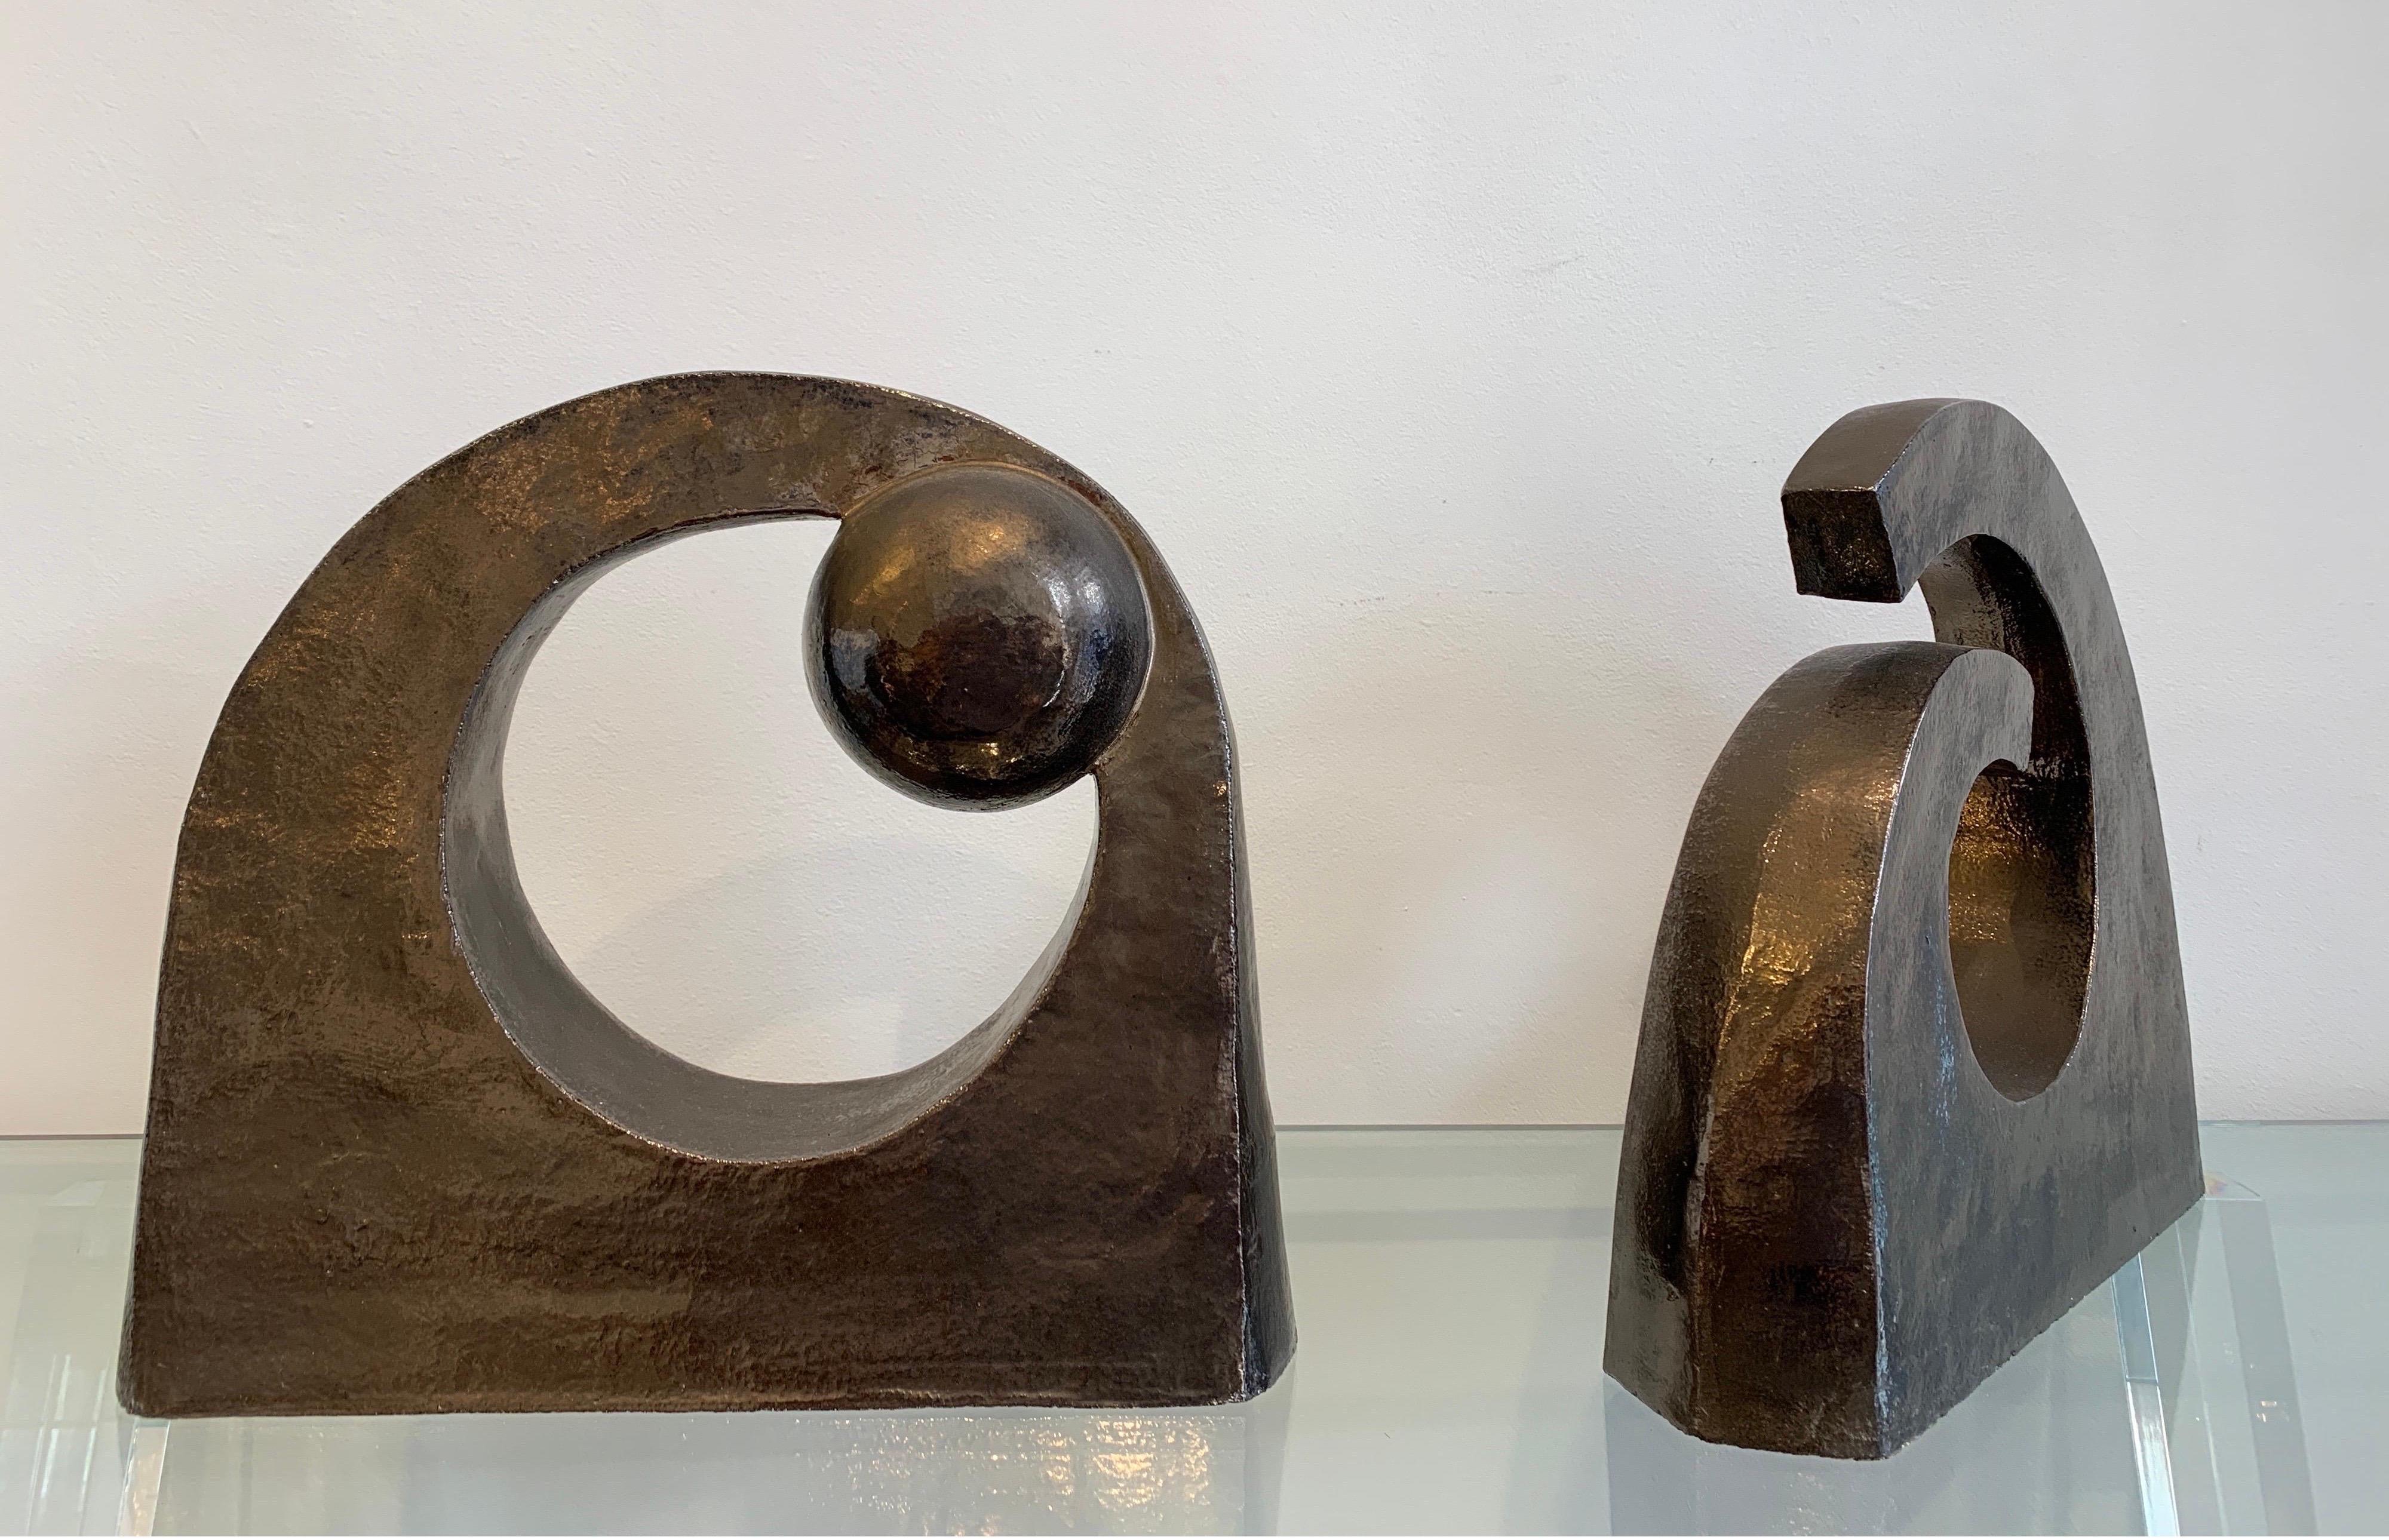 The present pair of Abstract ceramics is probably of Belgian origin. They form an ensemble, on being open the other closed with an inner sphere. Earthenware is the material with an oxidized metallic coating that simulates copper laying. They are